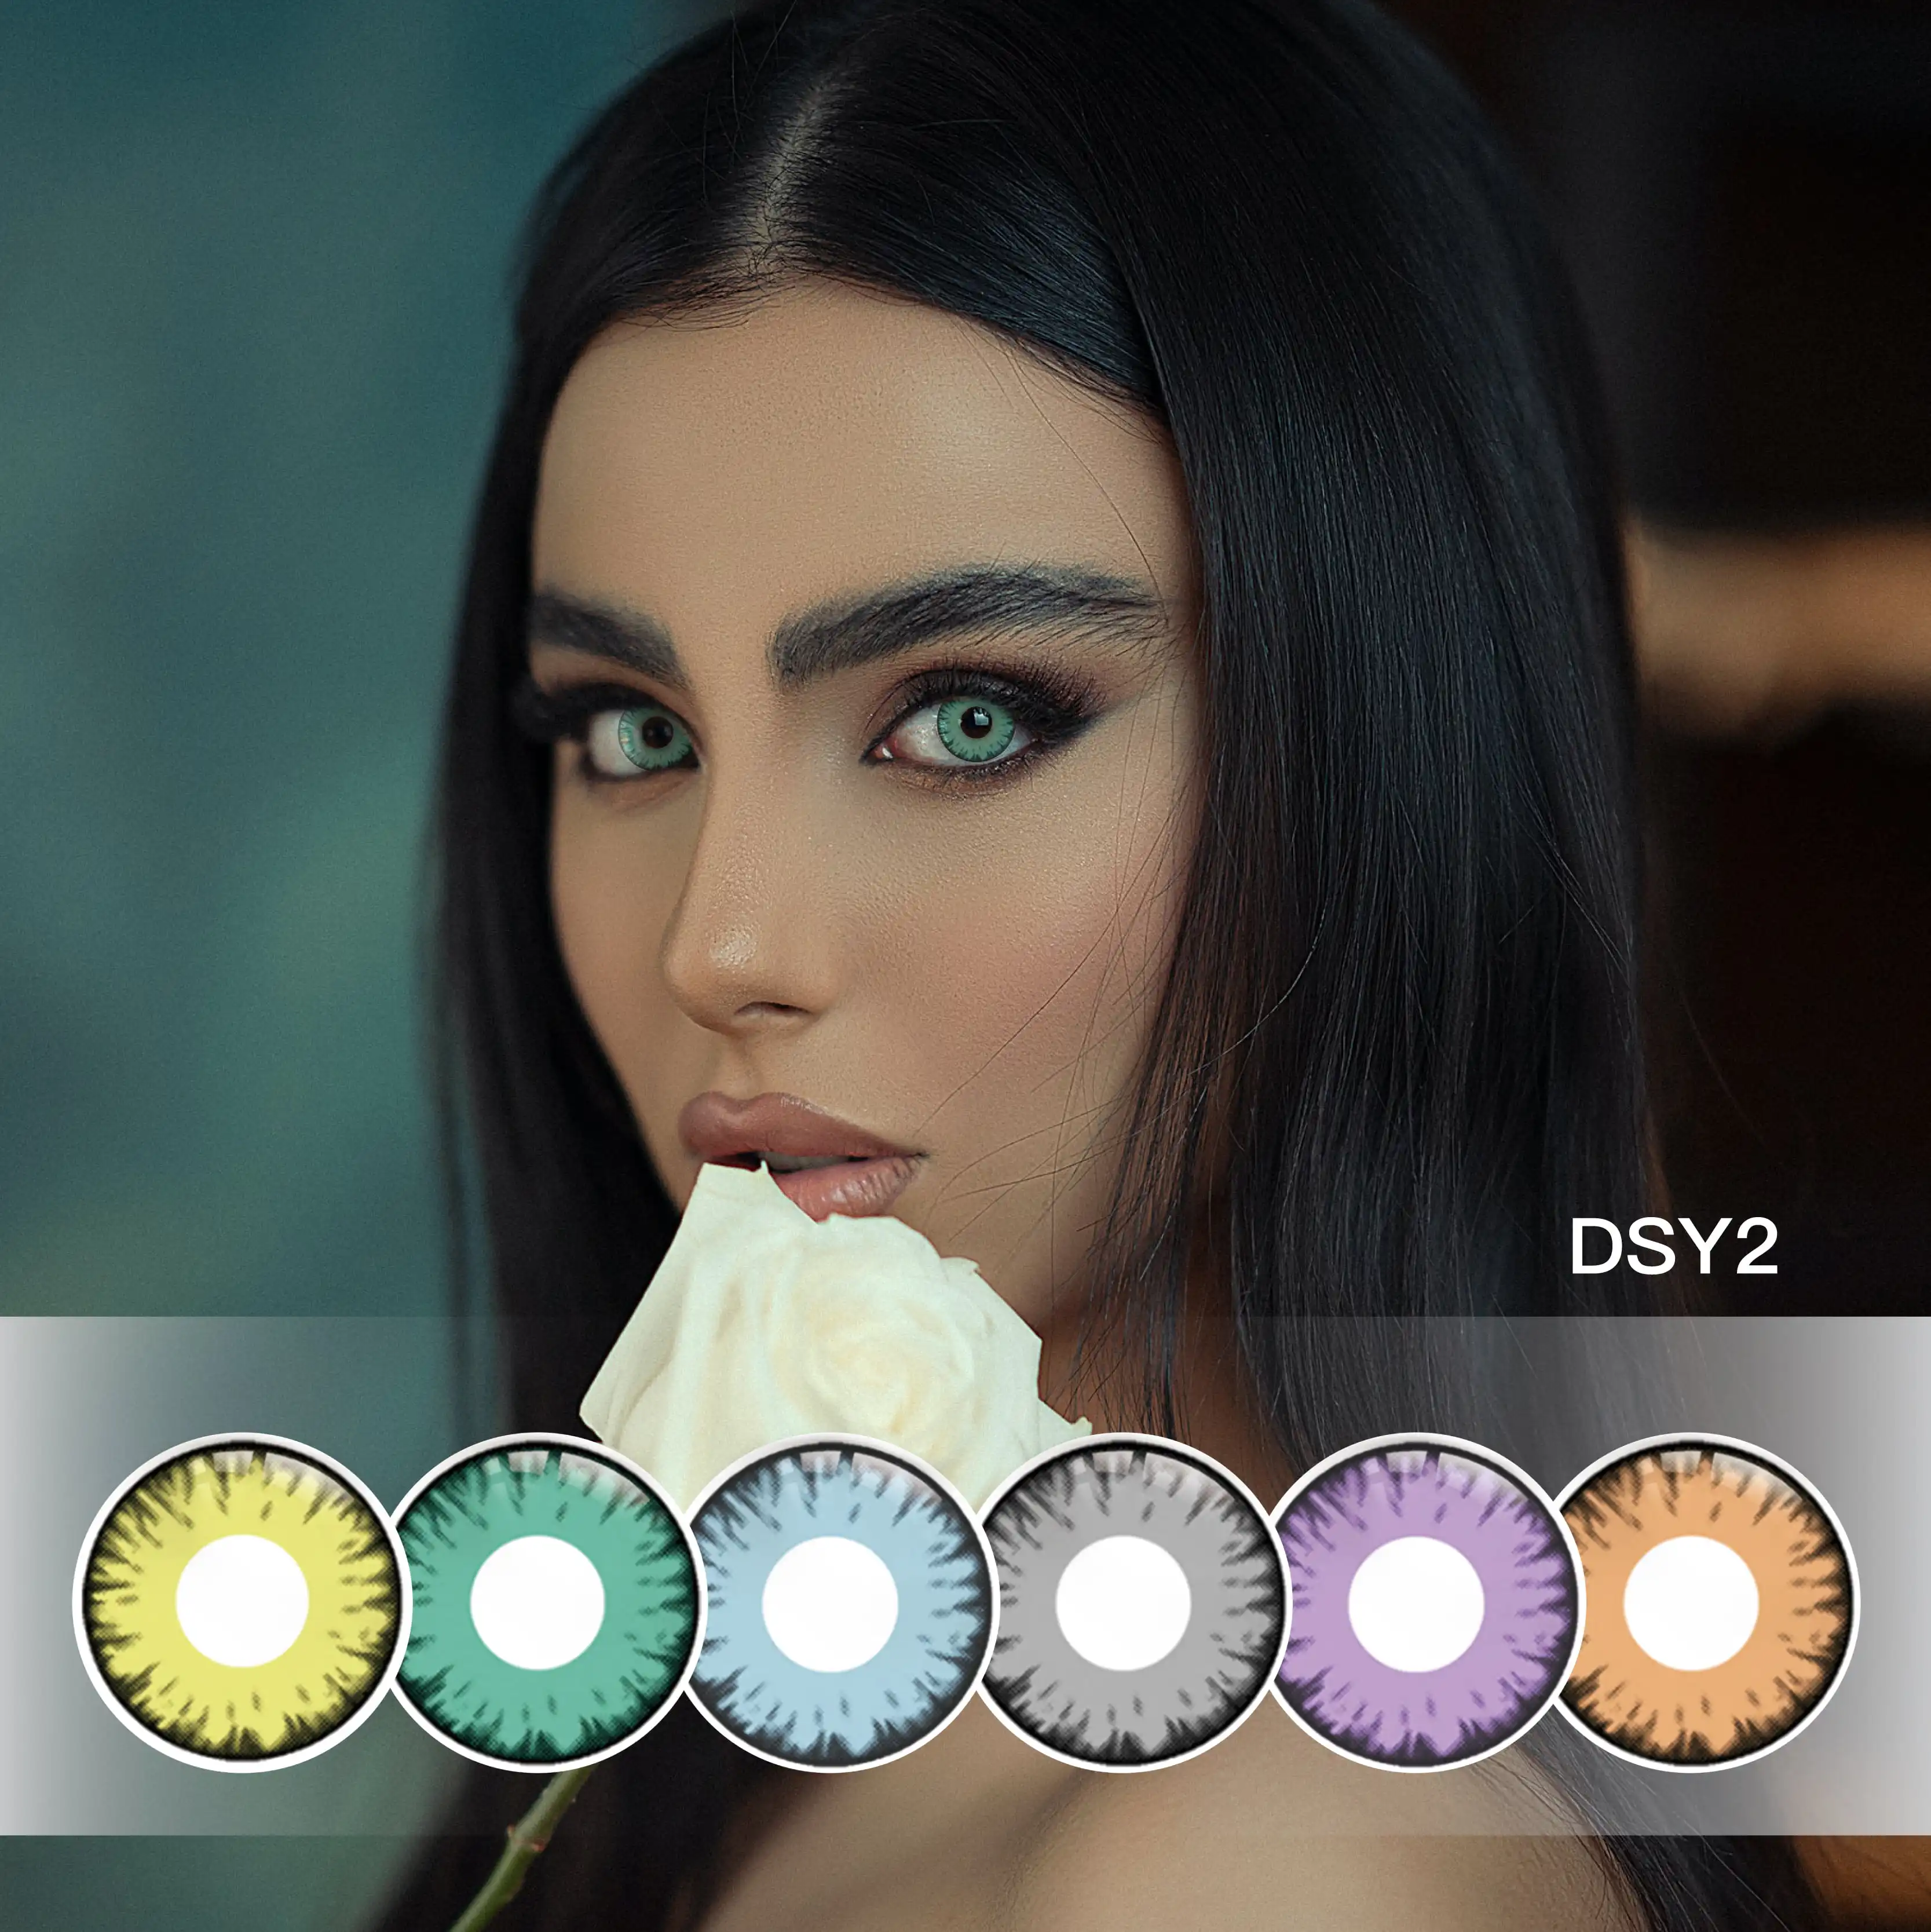 DSY2 Verycolor Green Yellow Color Lens Hot Selling Color Contact Lens Wholesale Price Monthly Contact New Arrival